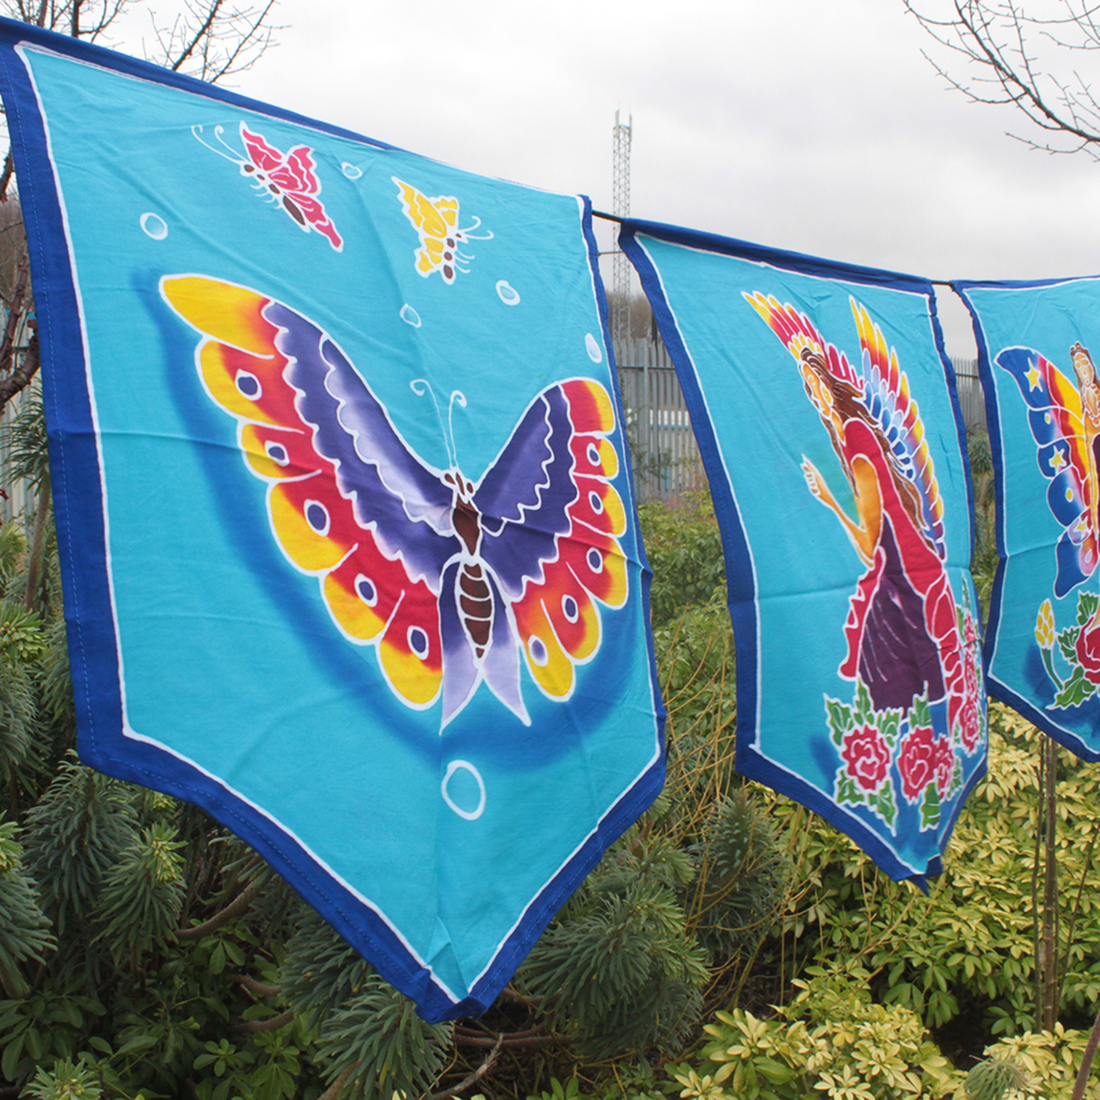 Five Flags - Butterfly and Angel - best price from Maltashopper.com BWAX-20